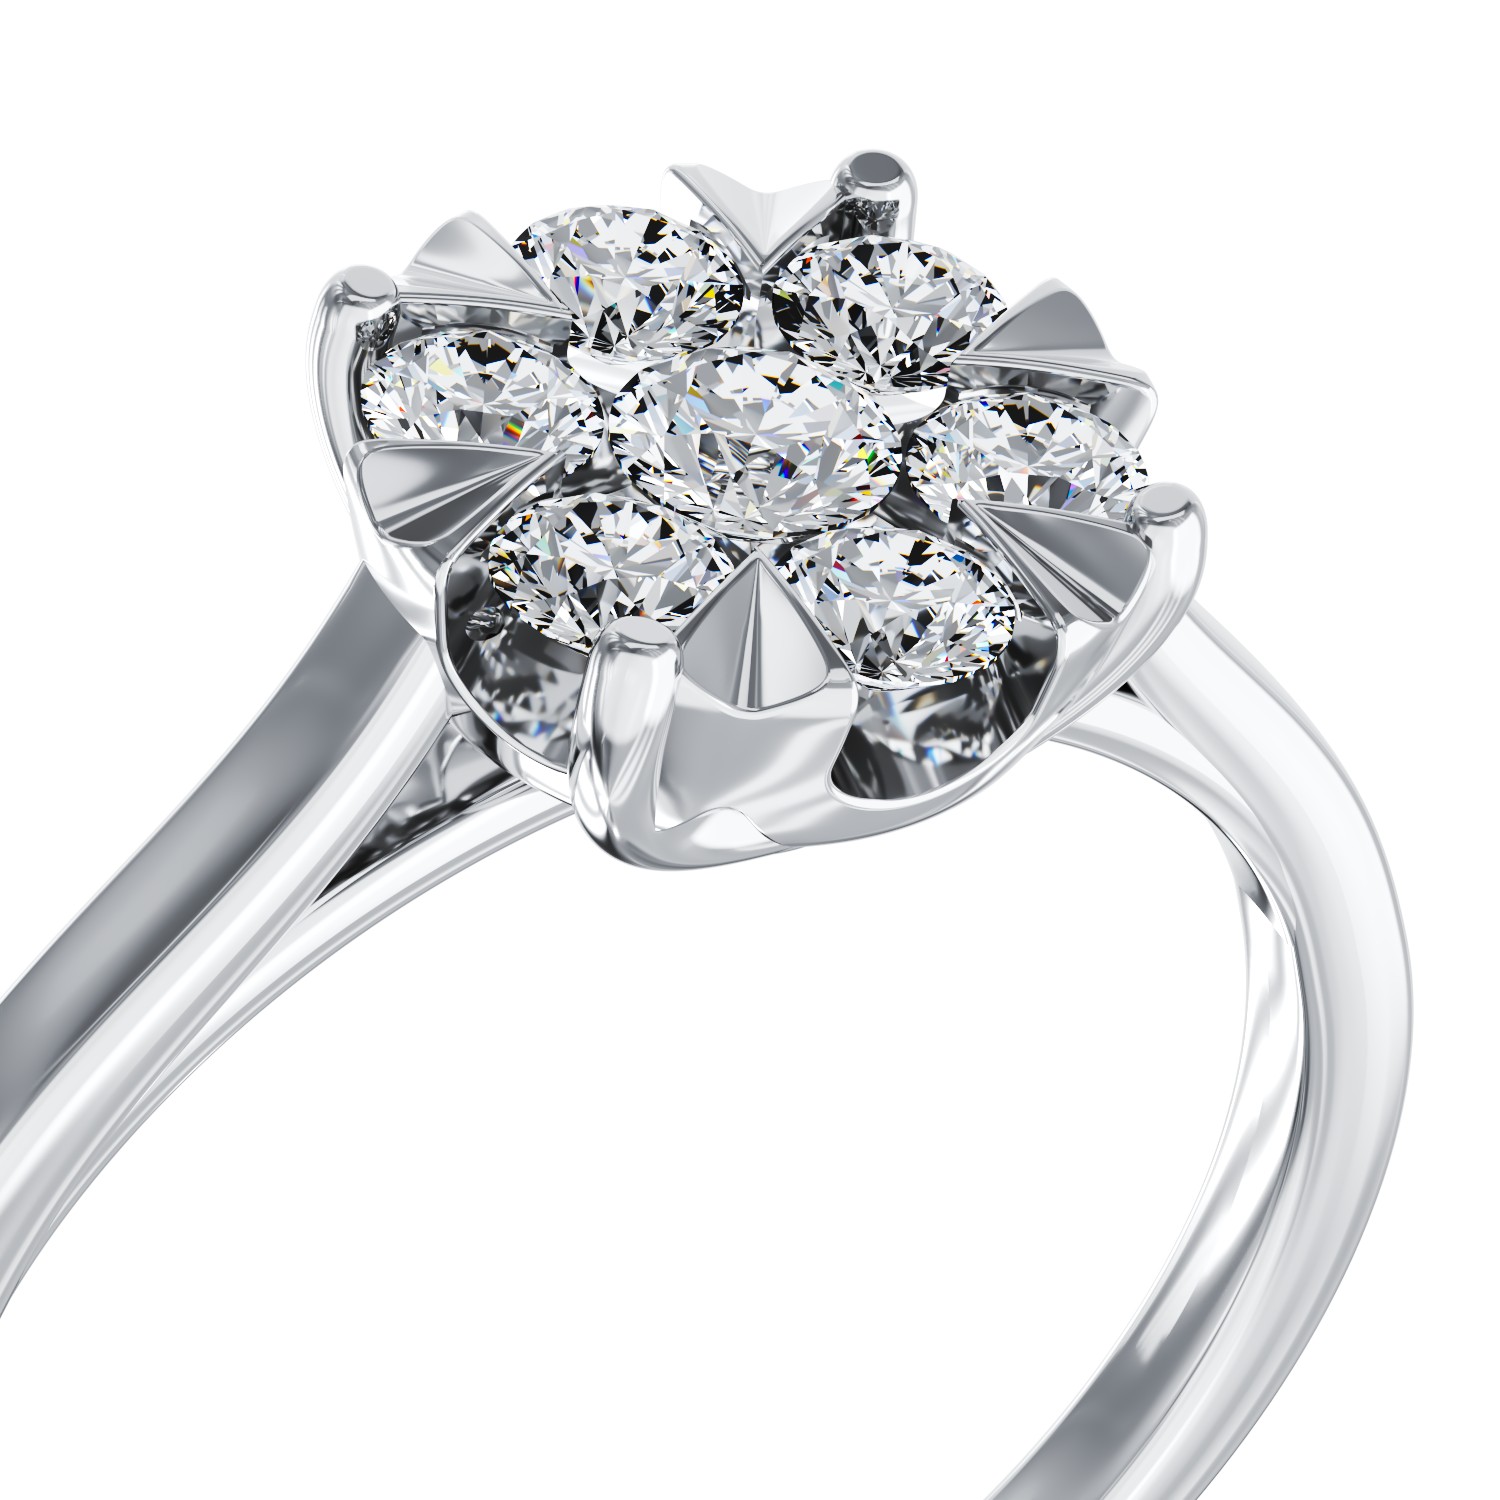 White gold engagement ring with 0.35ct diamonds